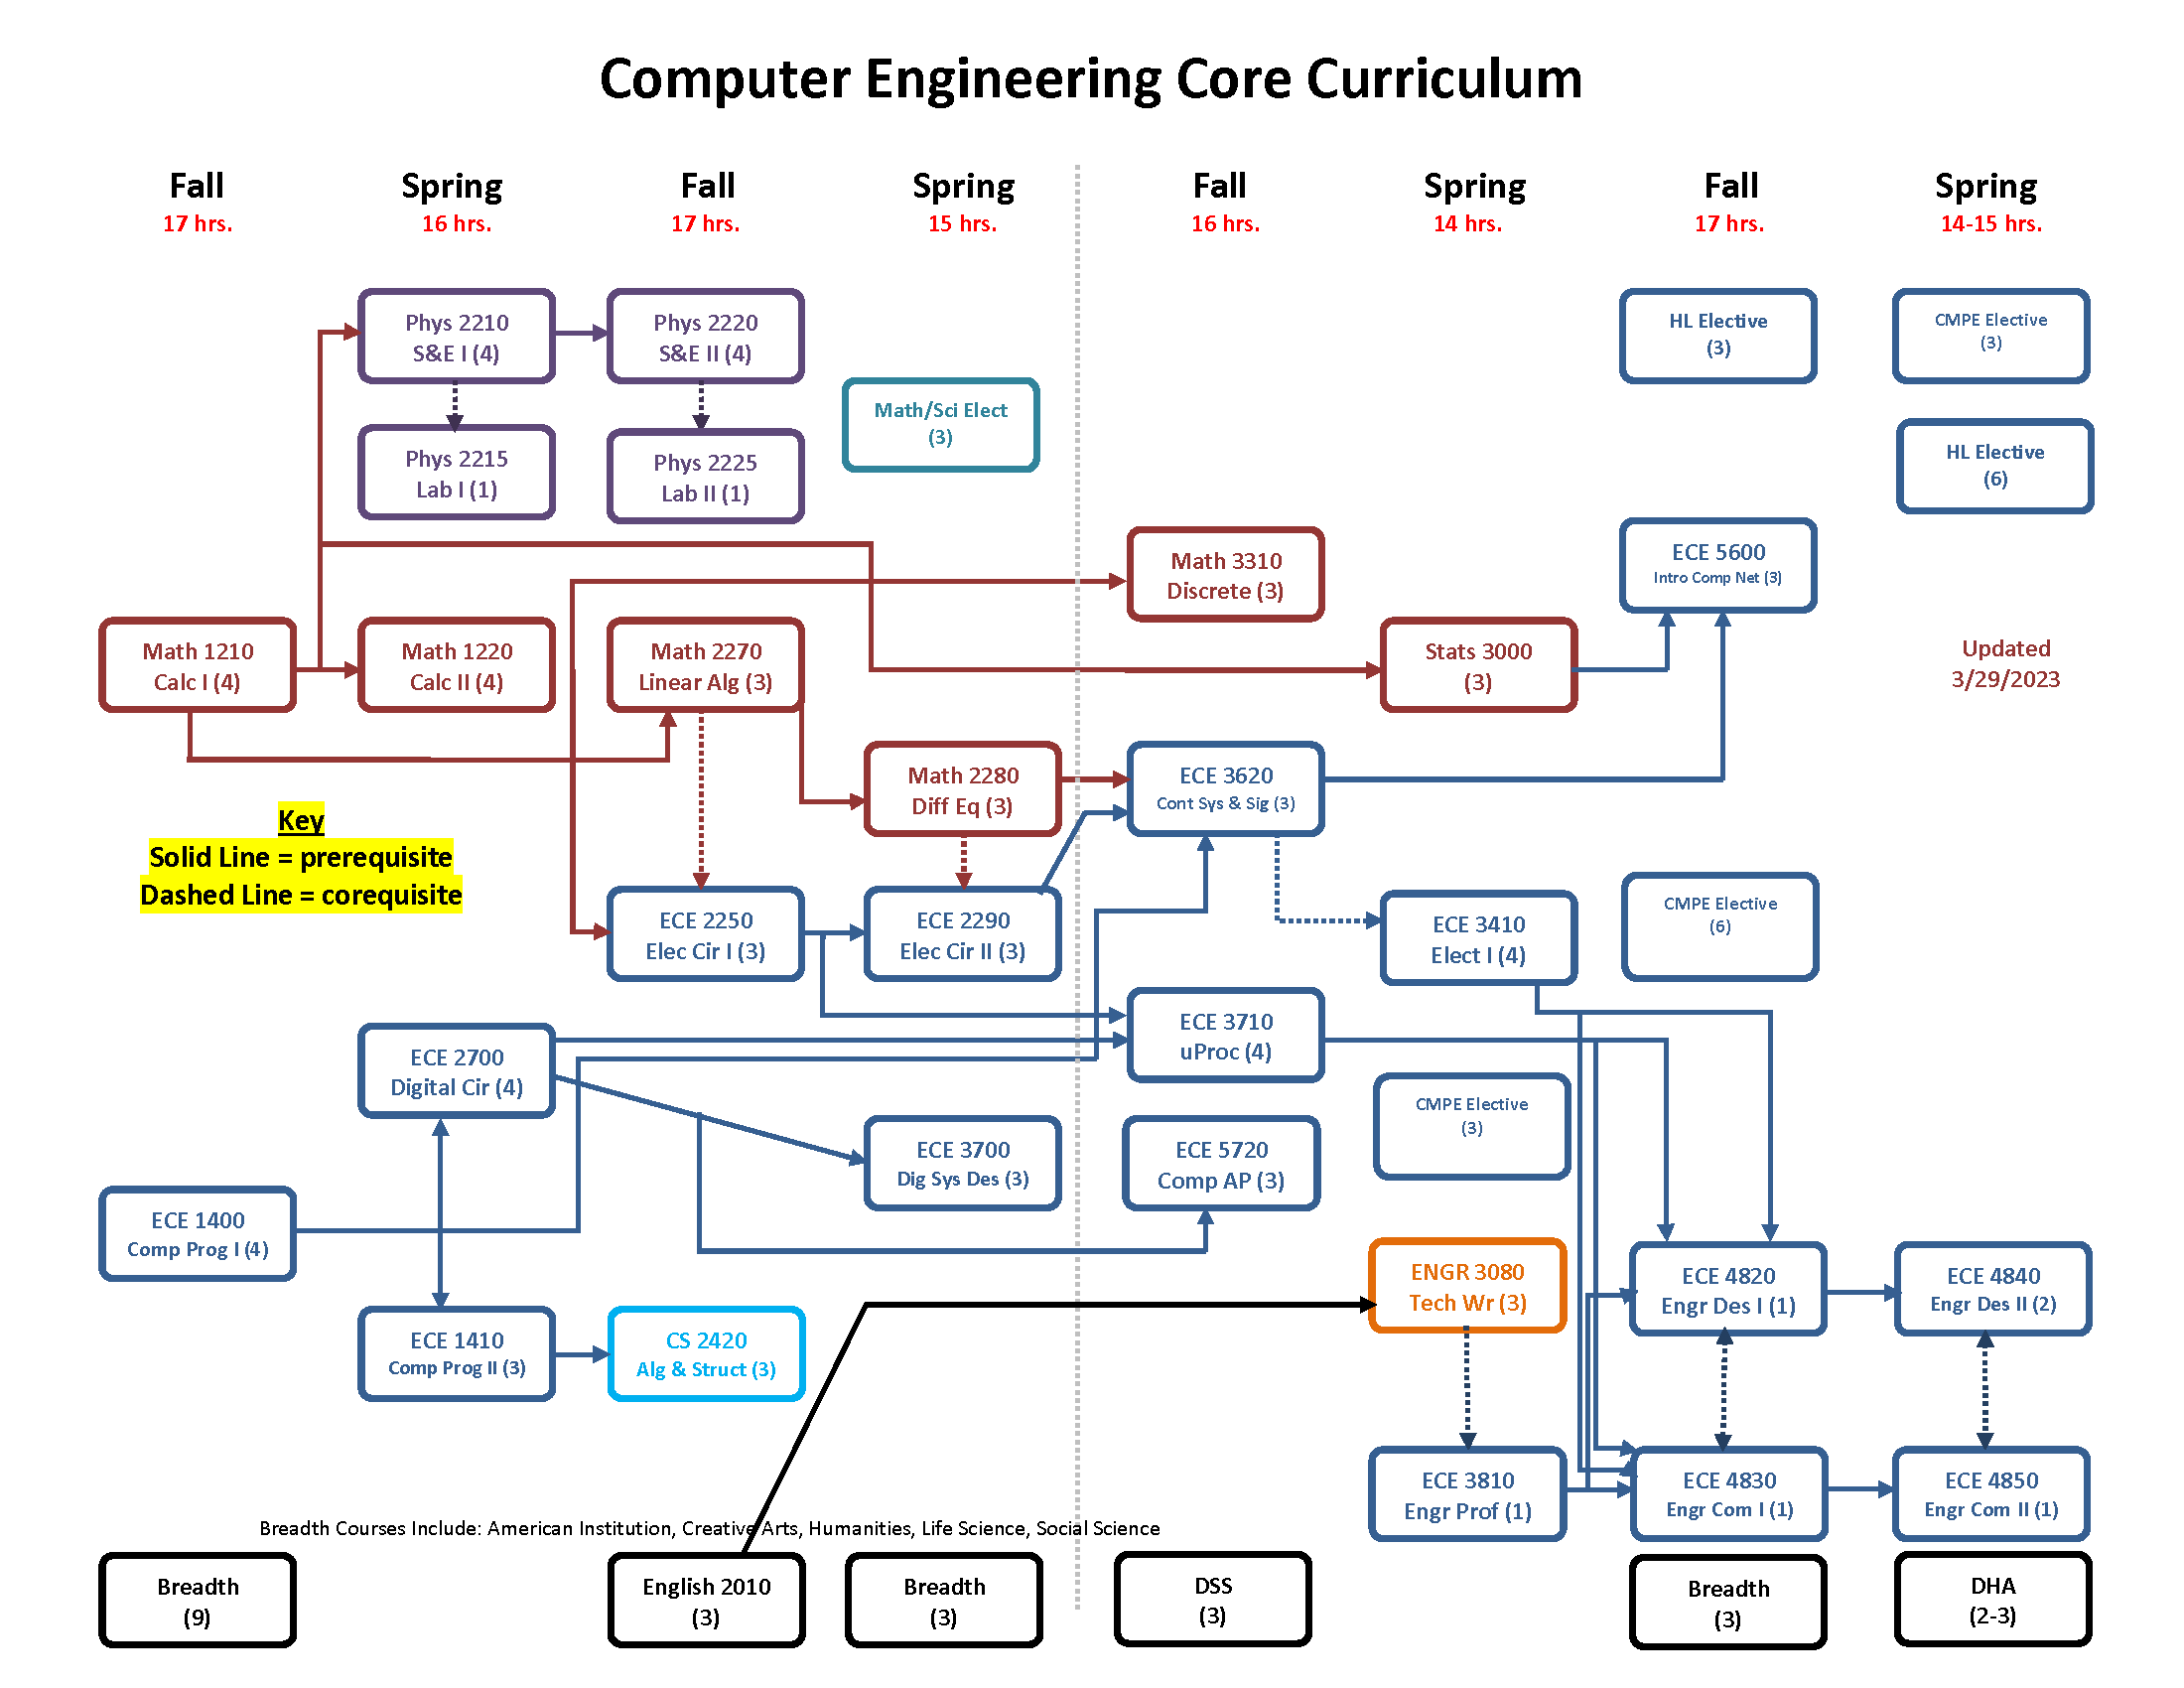 Visual representation of what courses one should take each year in the Computer Engineering Program